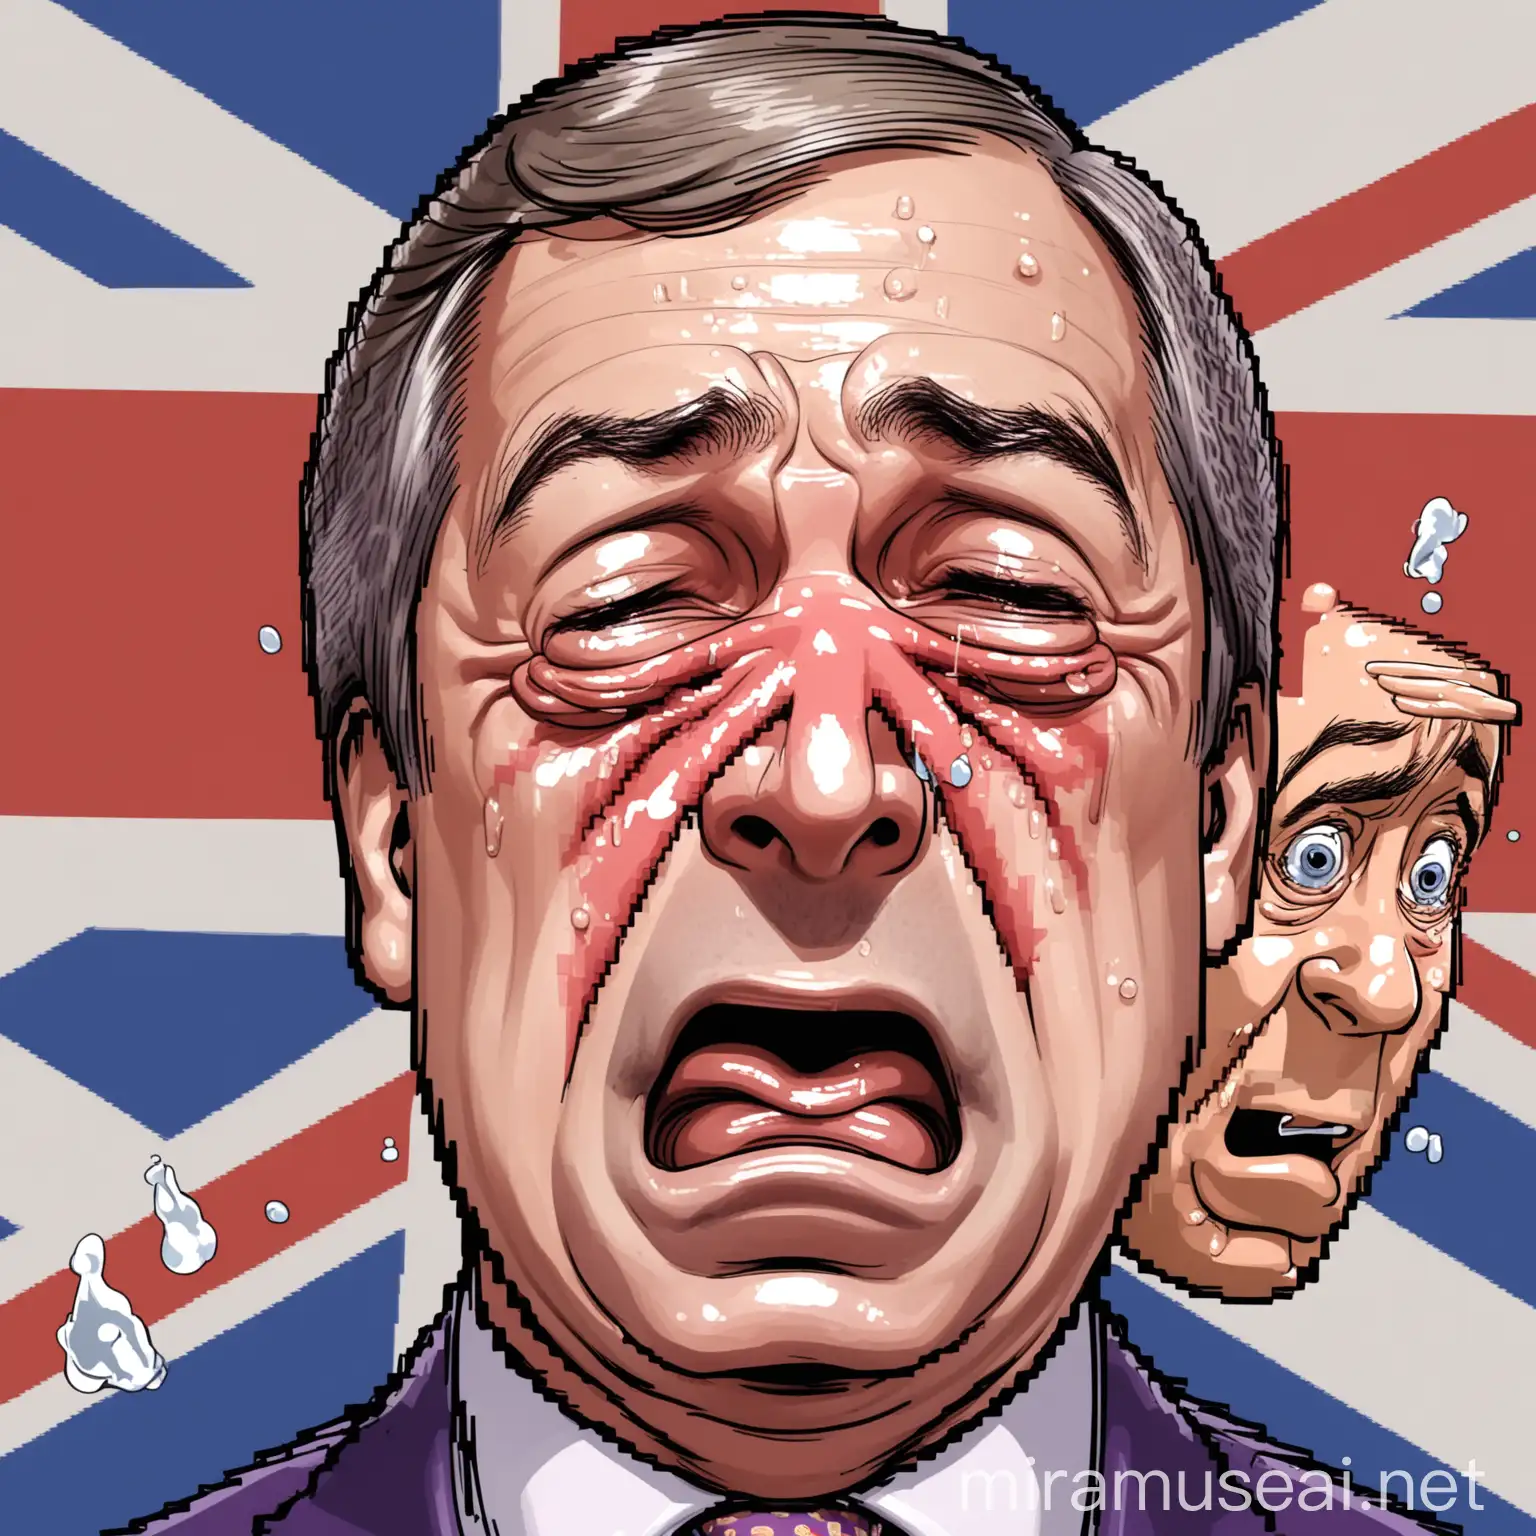 Nigel Farage crying as he vomits on a british flag in the style of a caricature cartoon